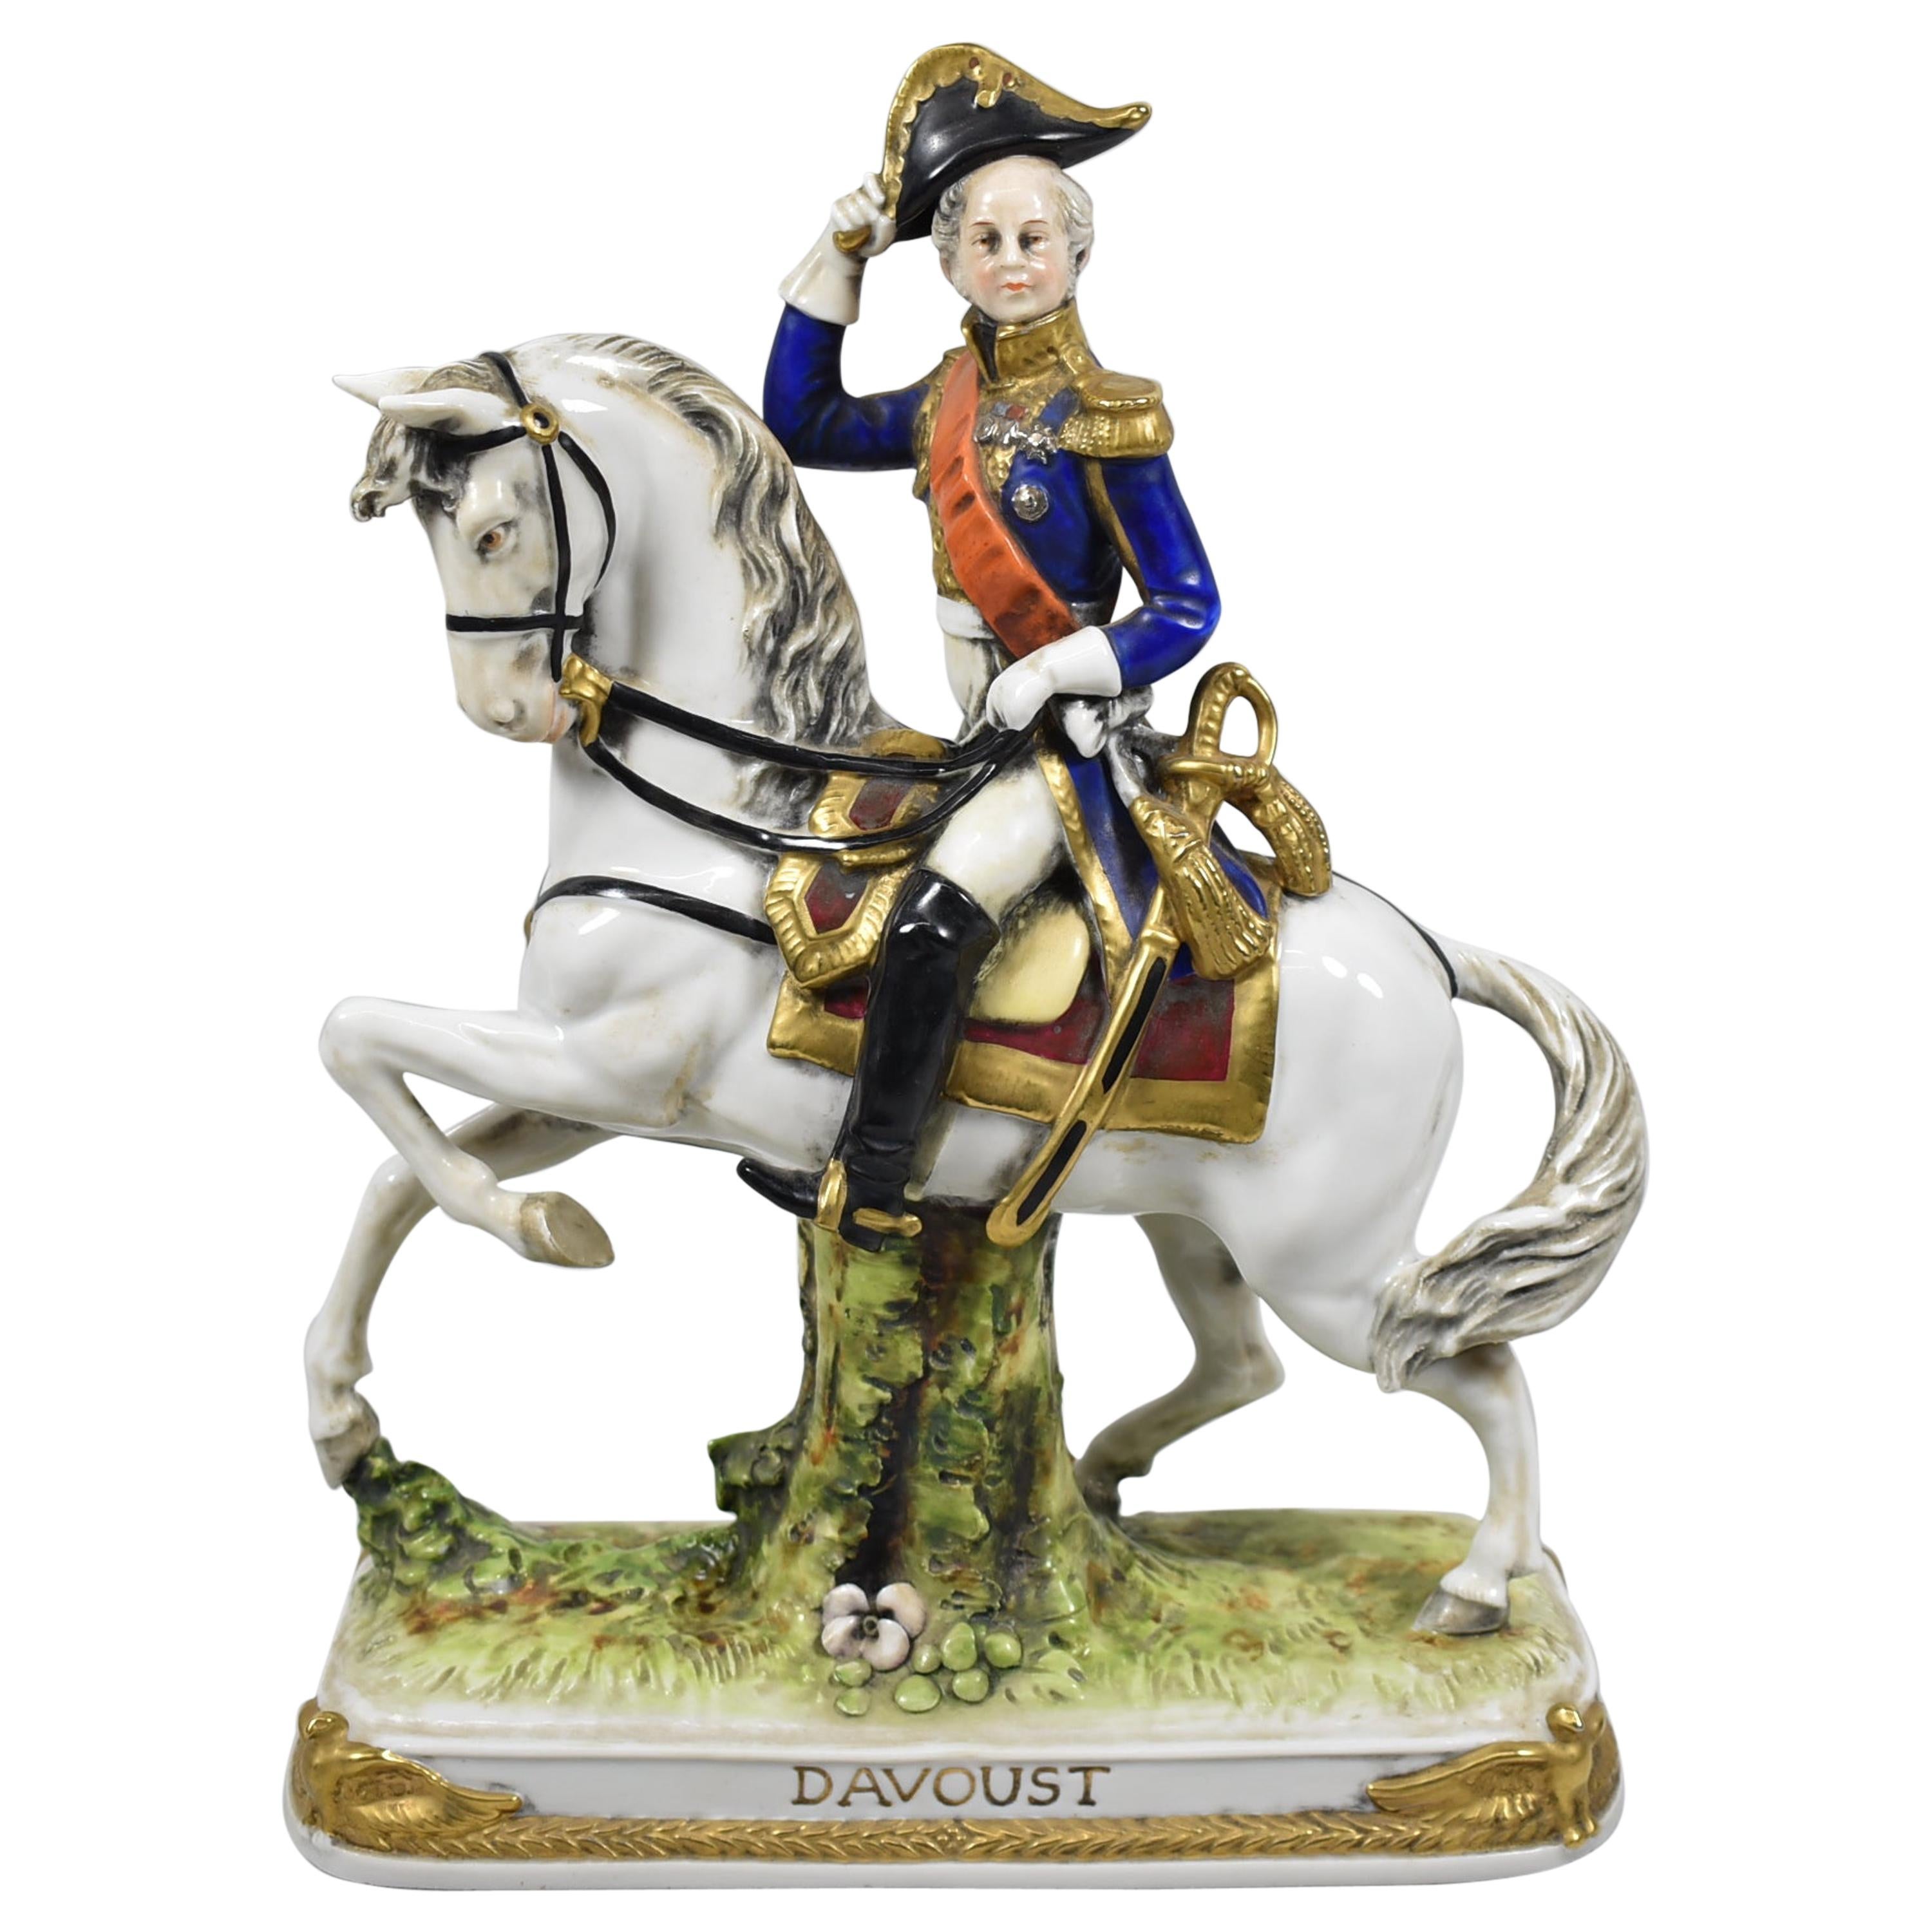 Scheibe-Alsbach Davoust Napoleon Porcelain Figurine, Germany For Sale